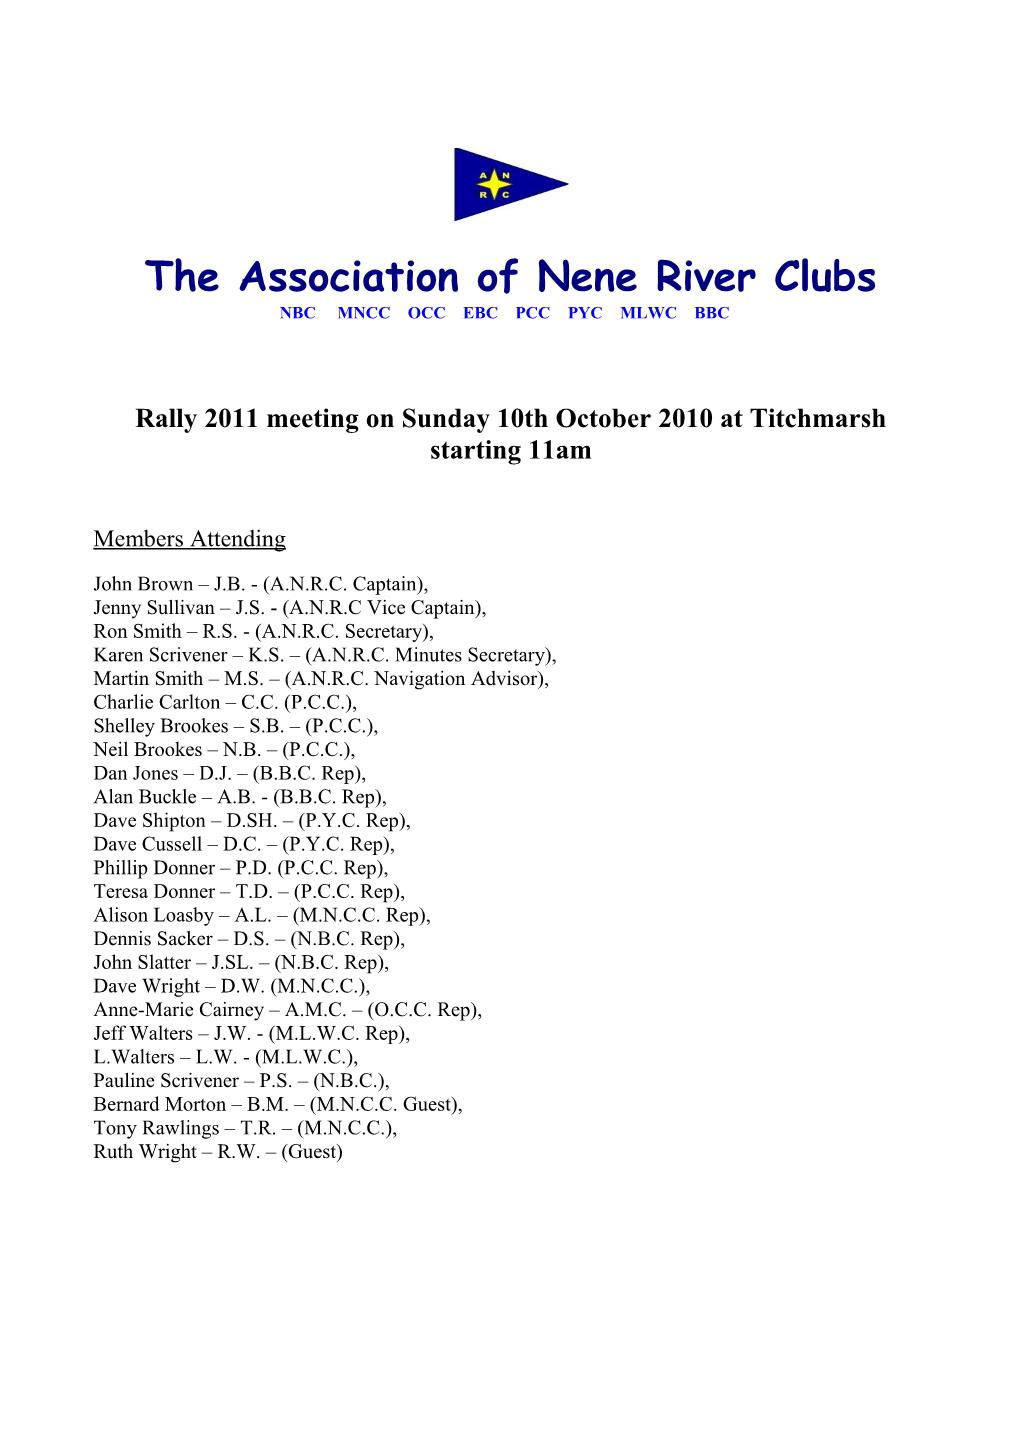 The Association of Neneriver Clubs